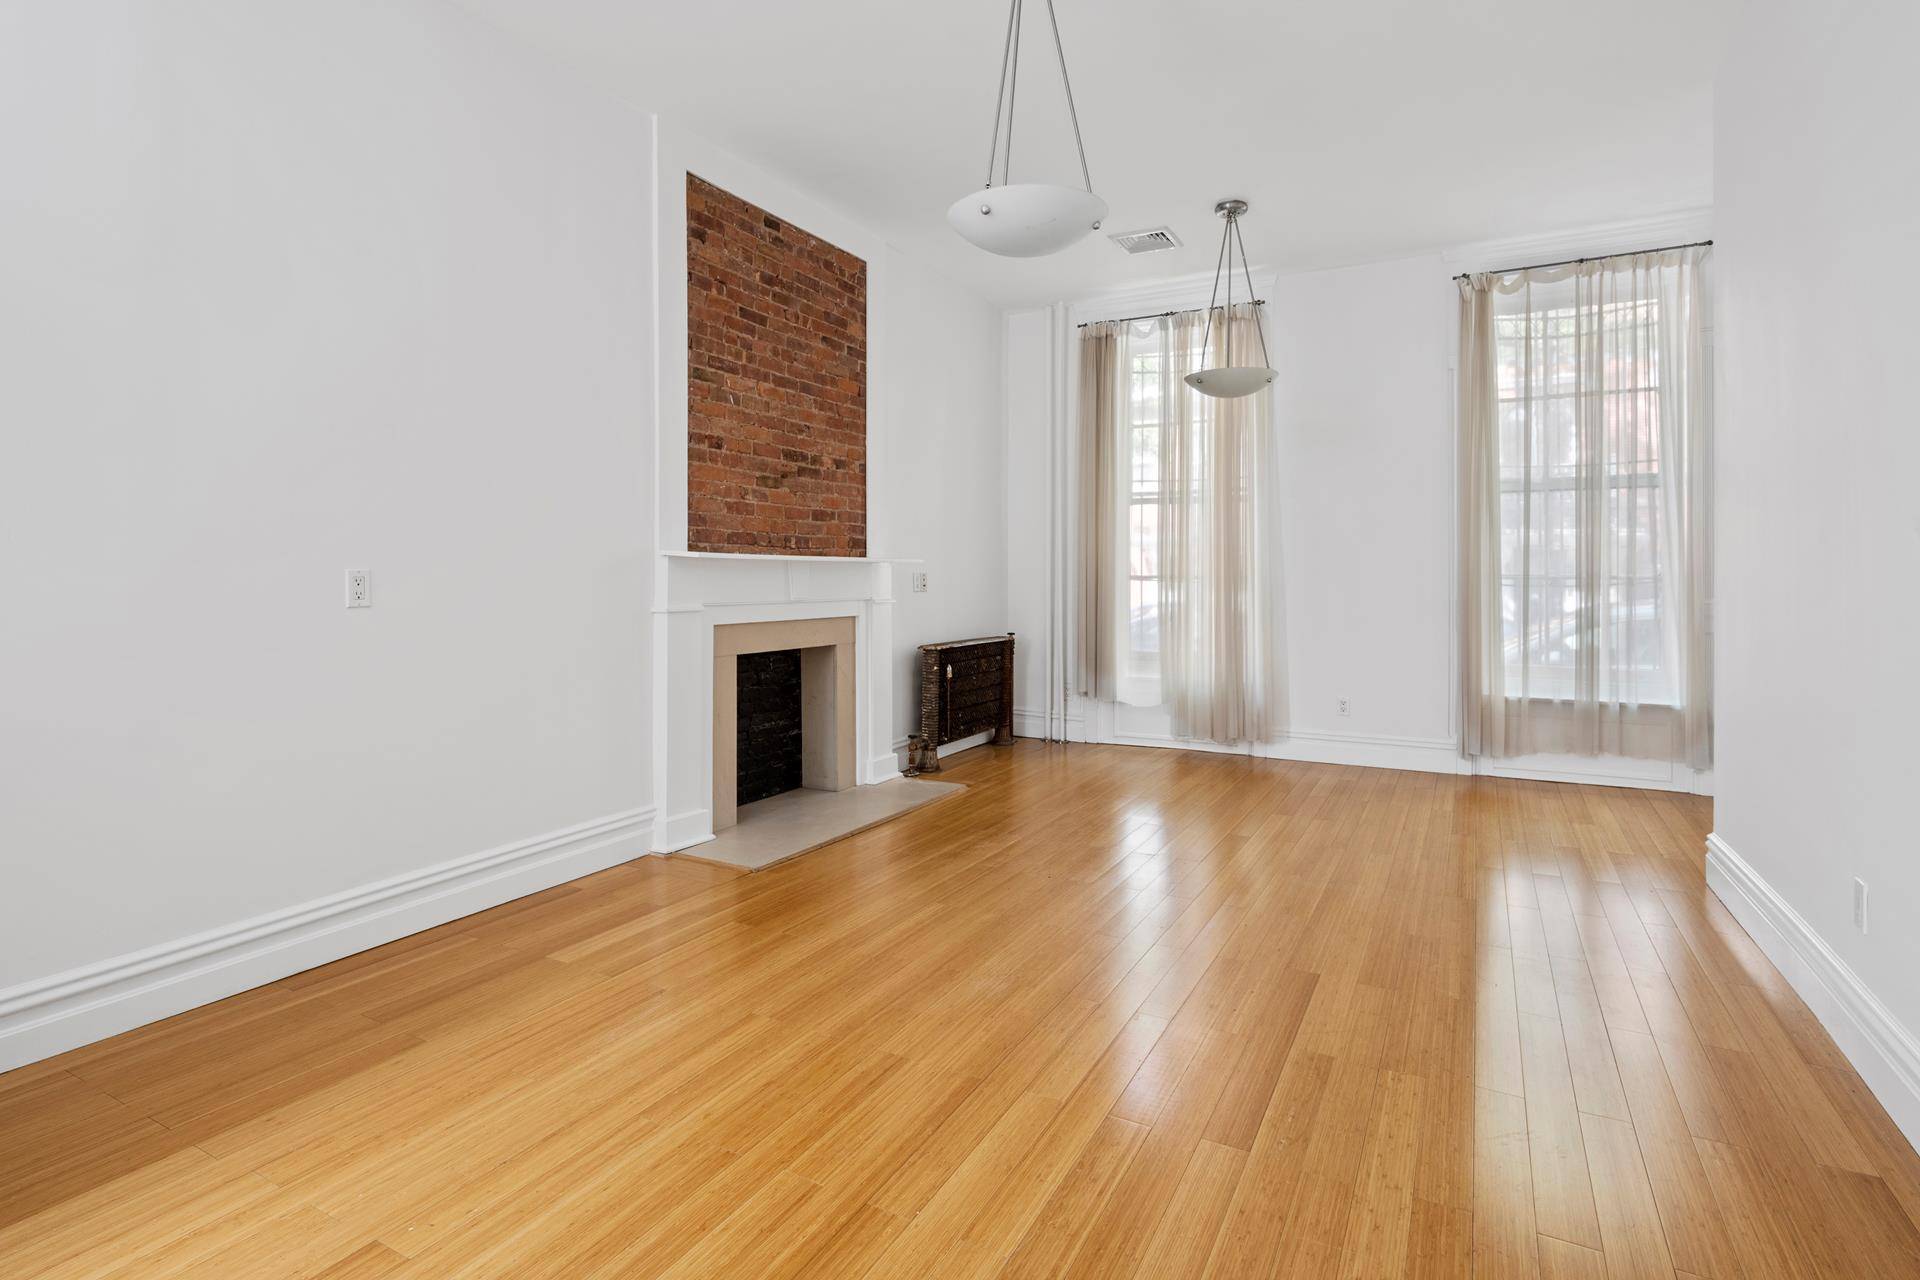 Residence 1F is a charming 1, 000 SF one bedroom one bathroom featuring hardwood floors throughout, renovated kitchen and bathroom, and oversized windows with northeastern and eastern exposures.